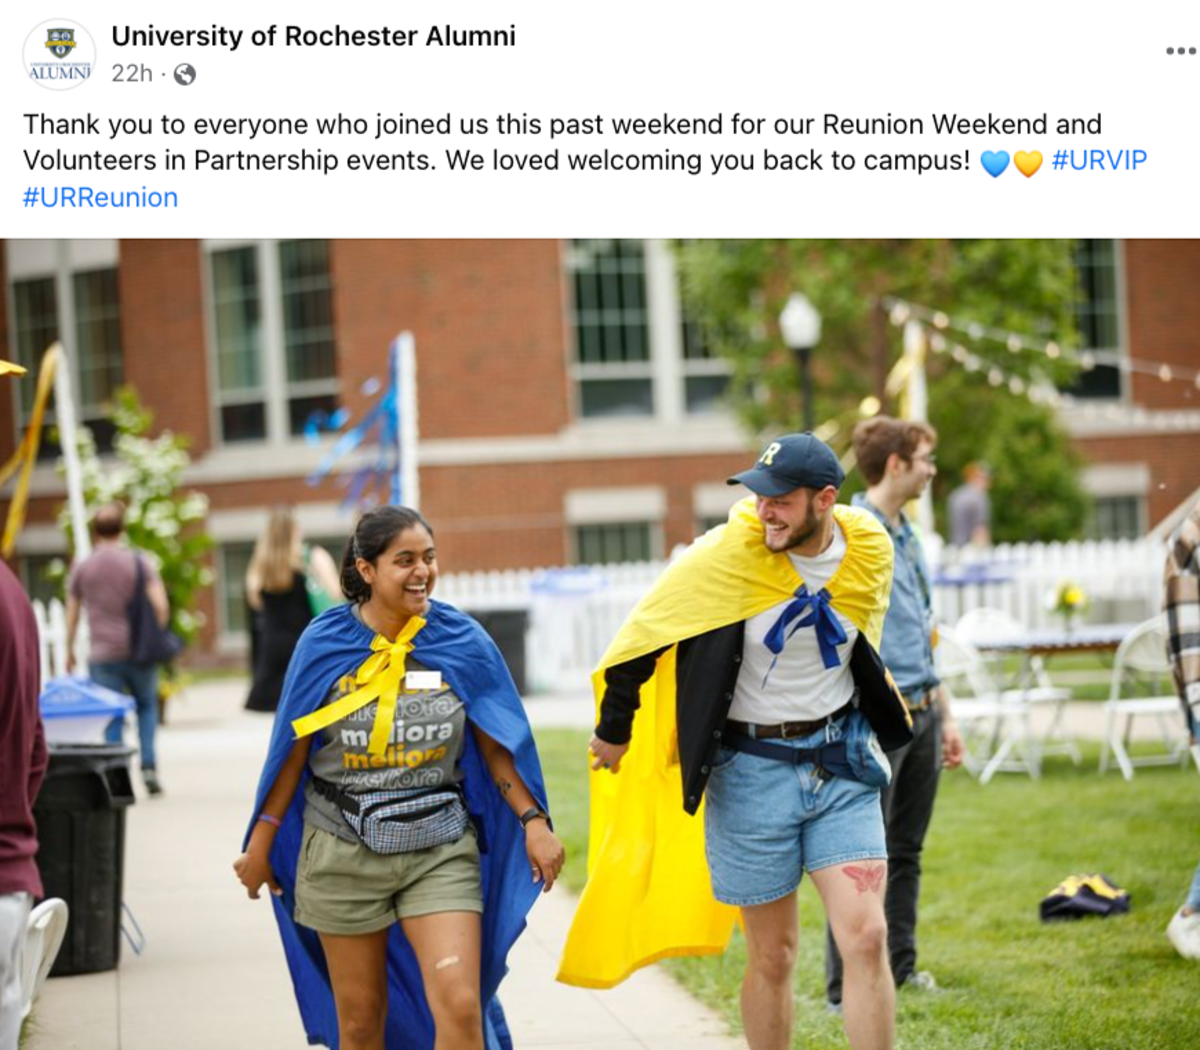 Image: Volunteers wearing UR capes at Reunion weekend/VIP conference